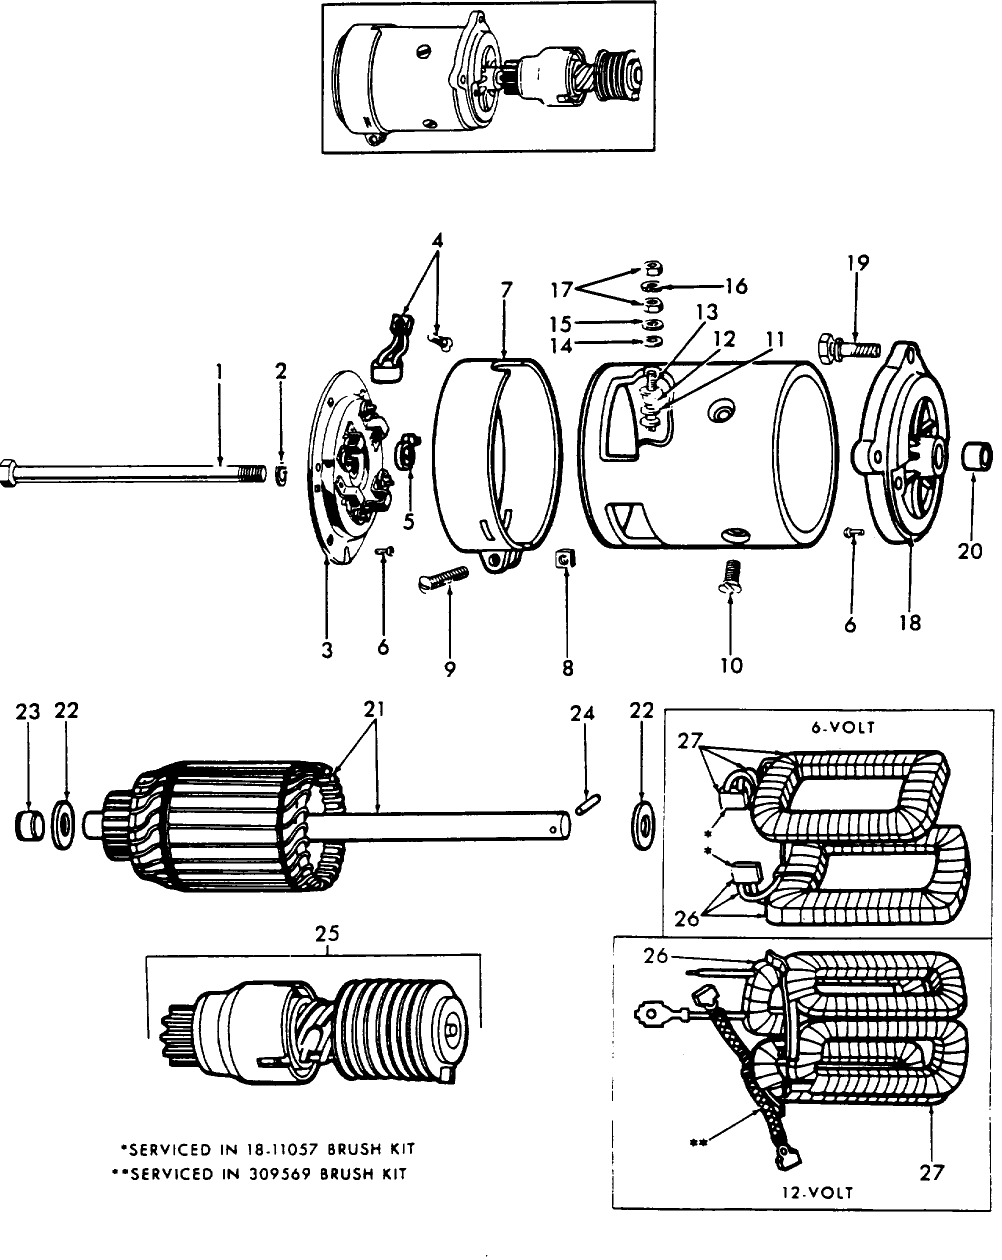 11C01 STARTER MOTOR & RELATED PARTS